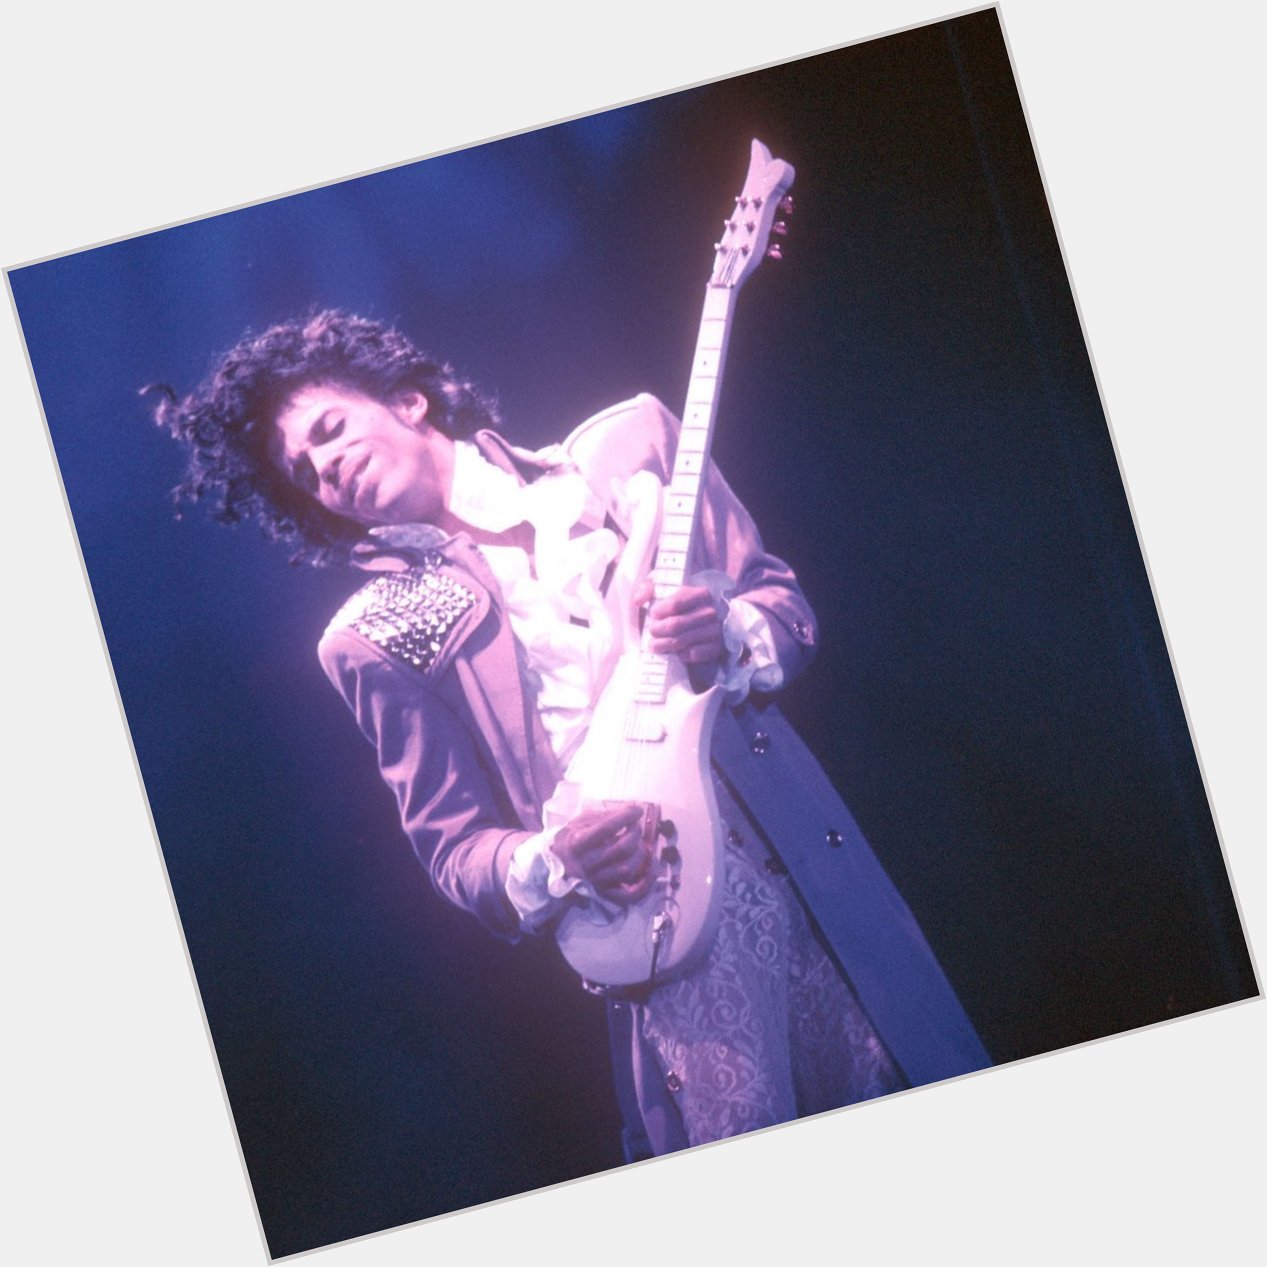 Happy birthday to one of the greatest musicians, artists, and THE greatest performer of all time, Prince 